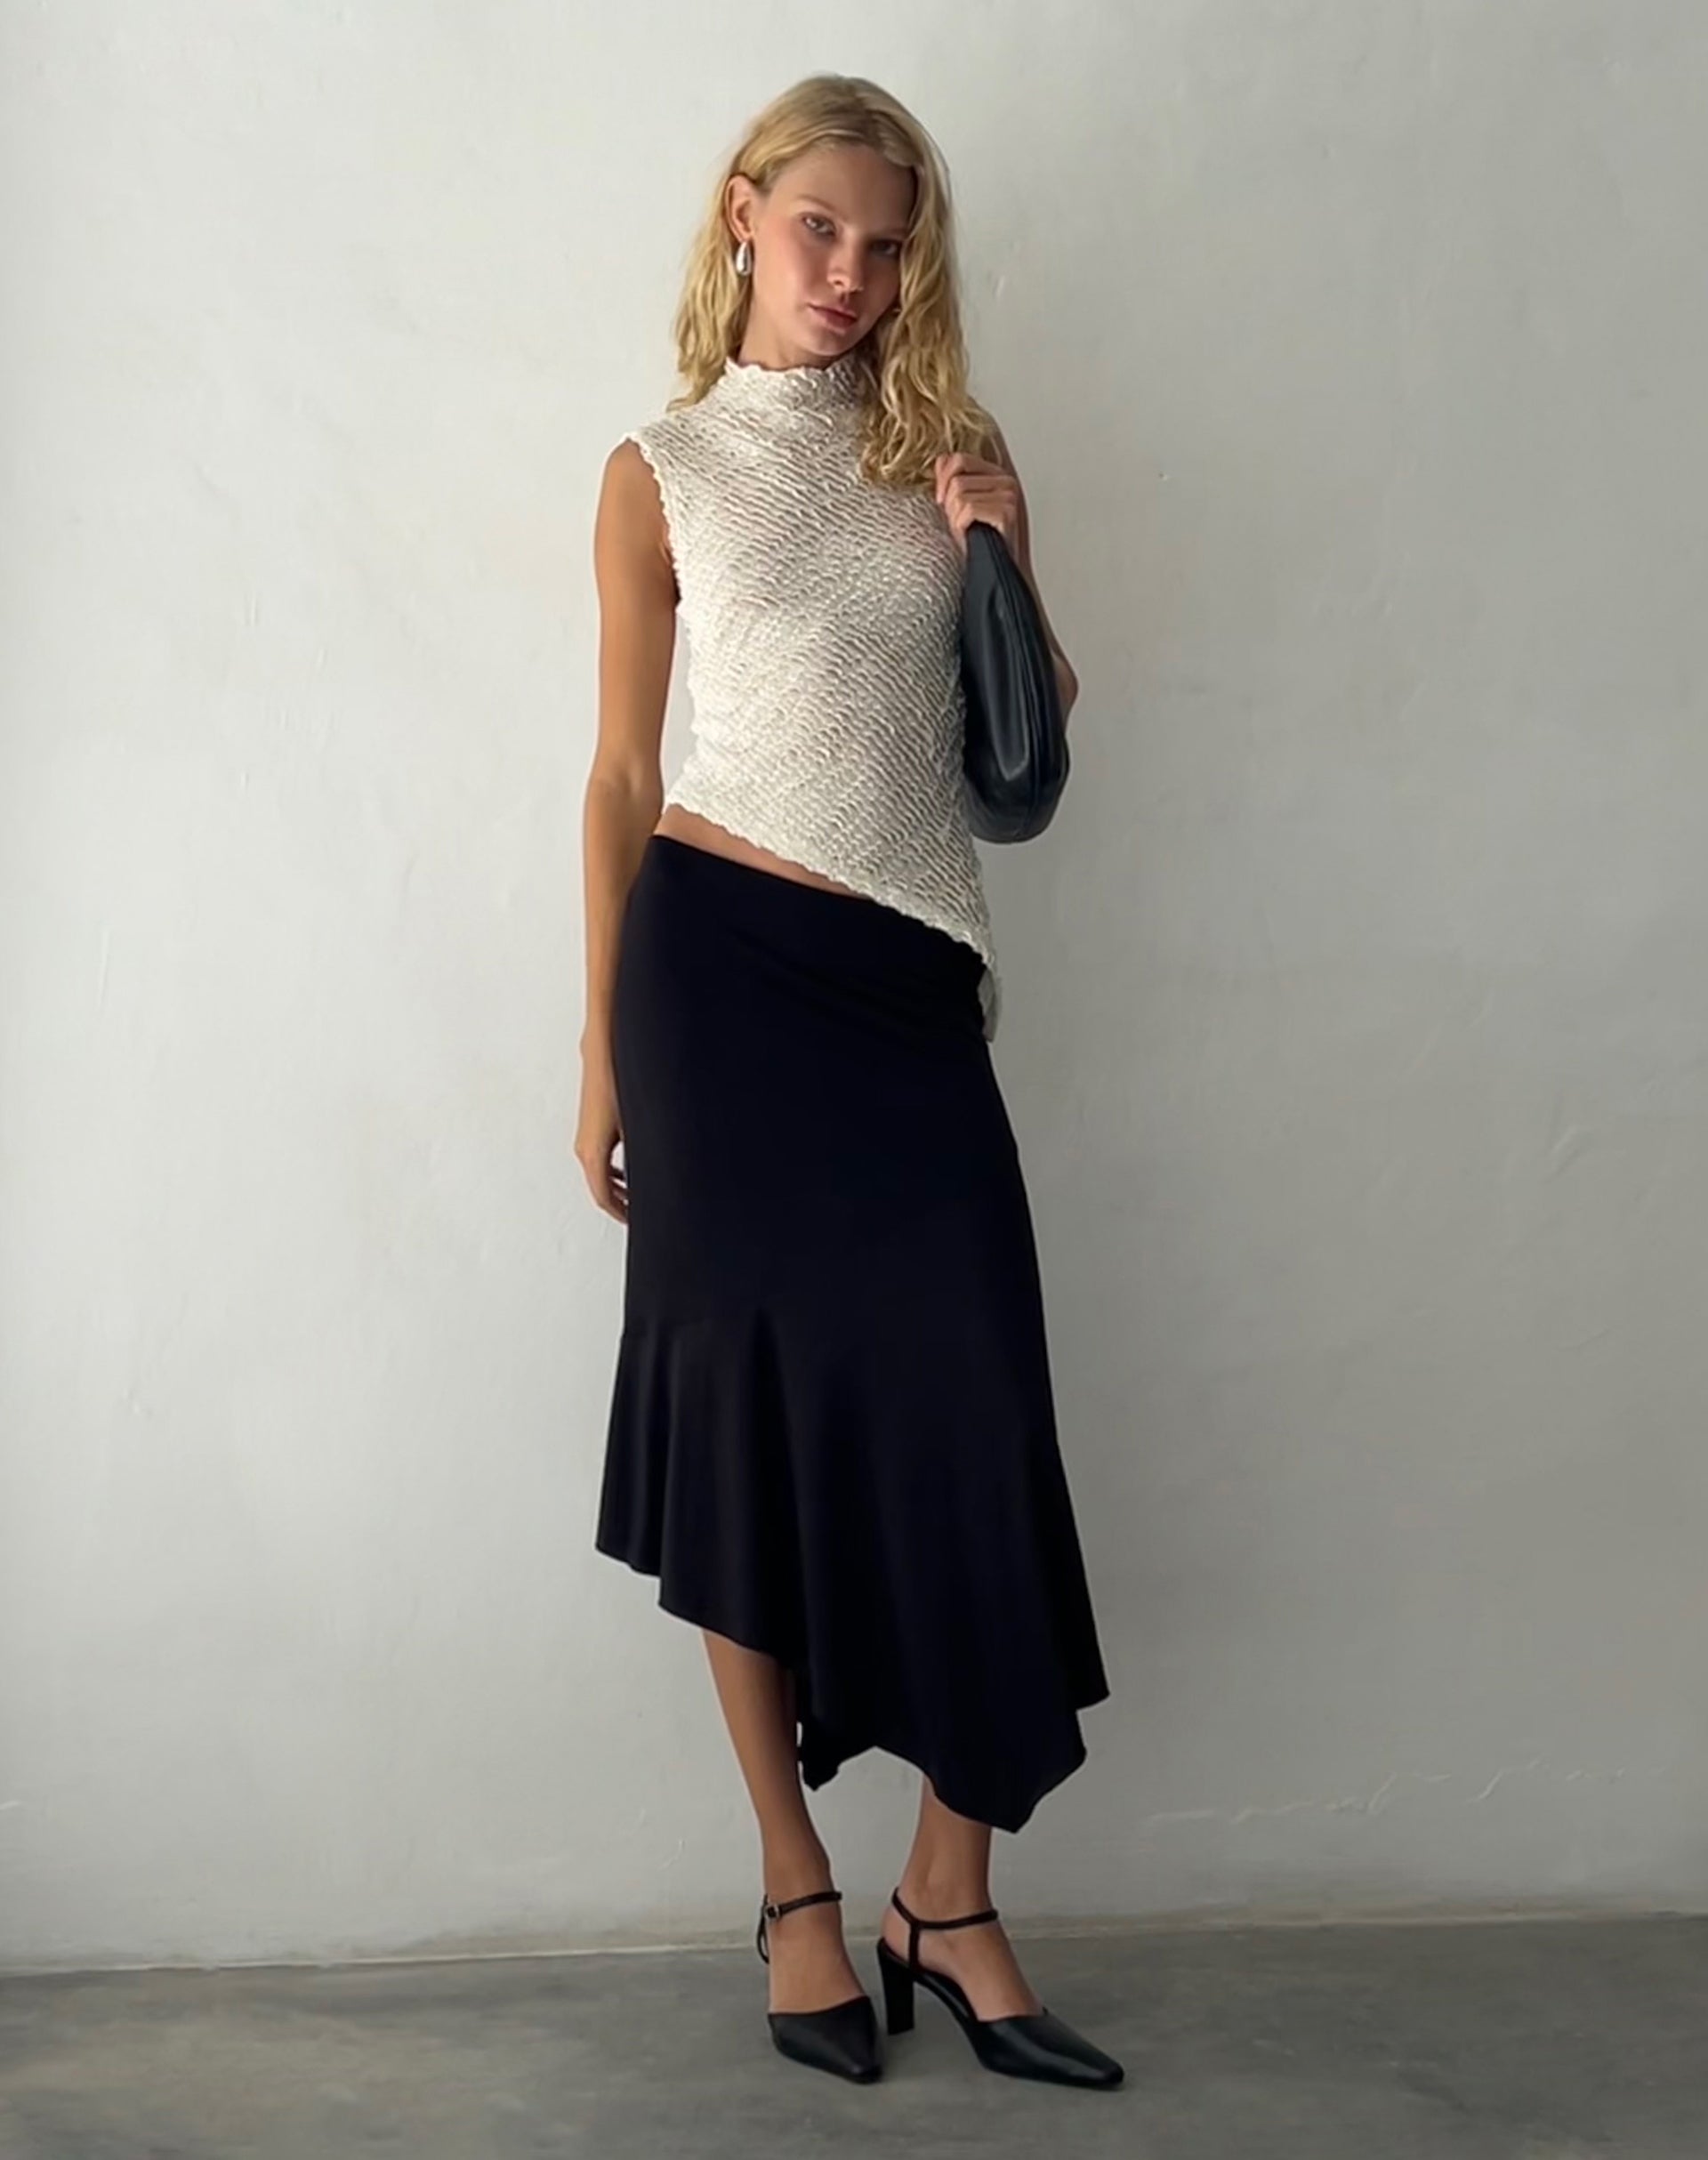 Image of Ember Sleevless Top in Textured Ivory